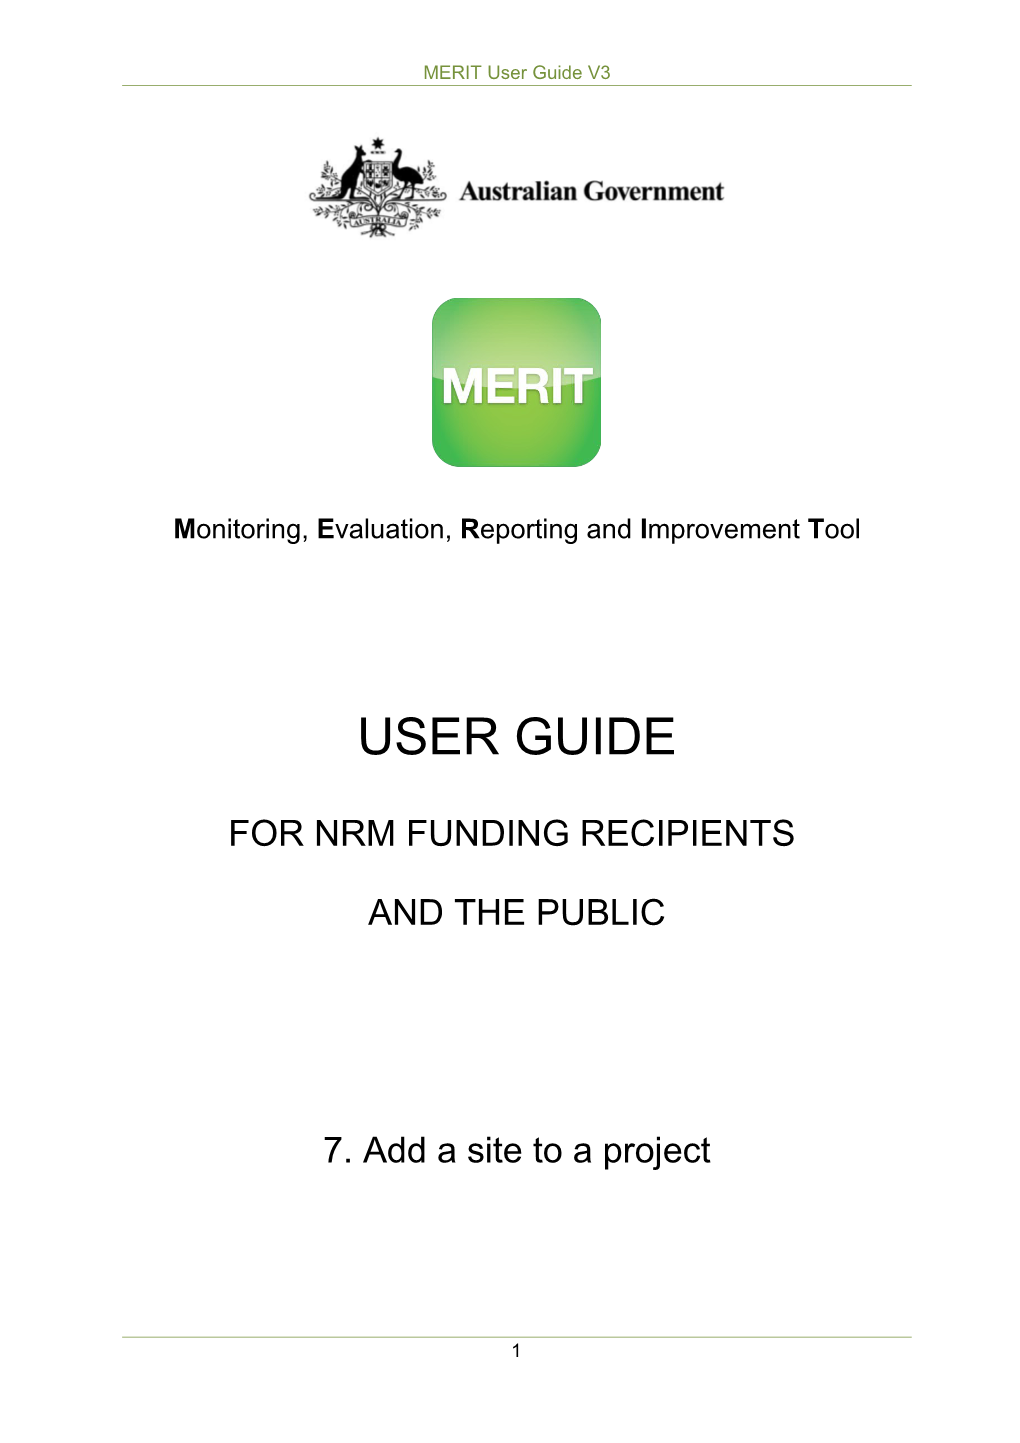 MERIT User Guide 7 Add a Site to a Project